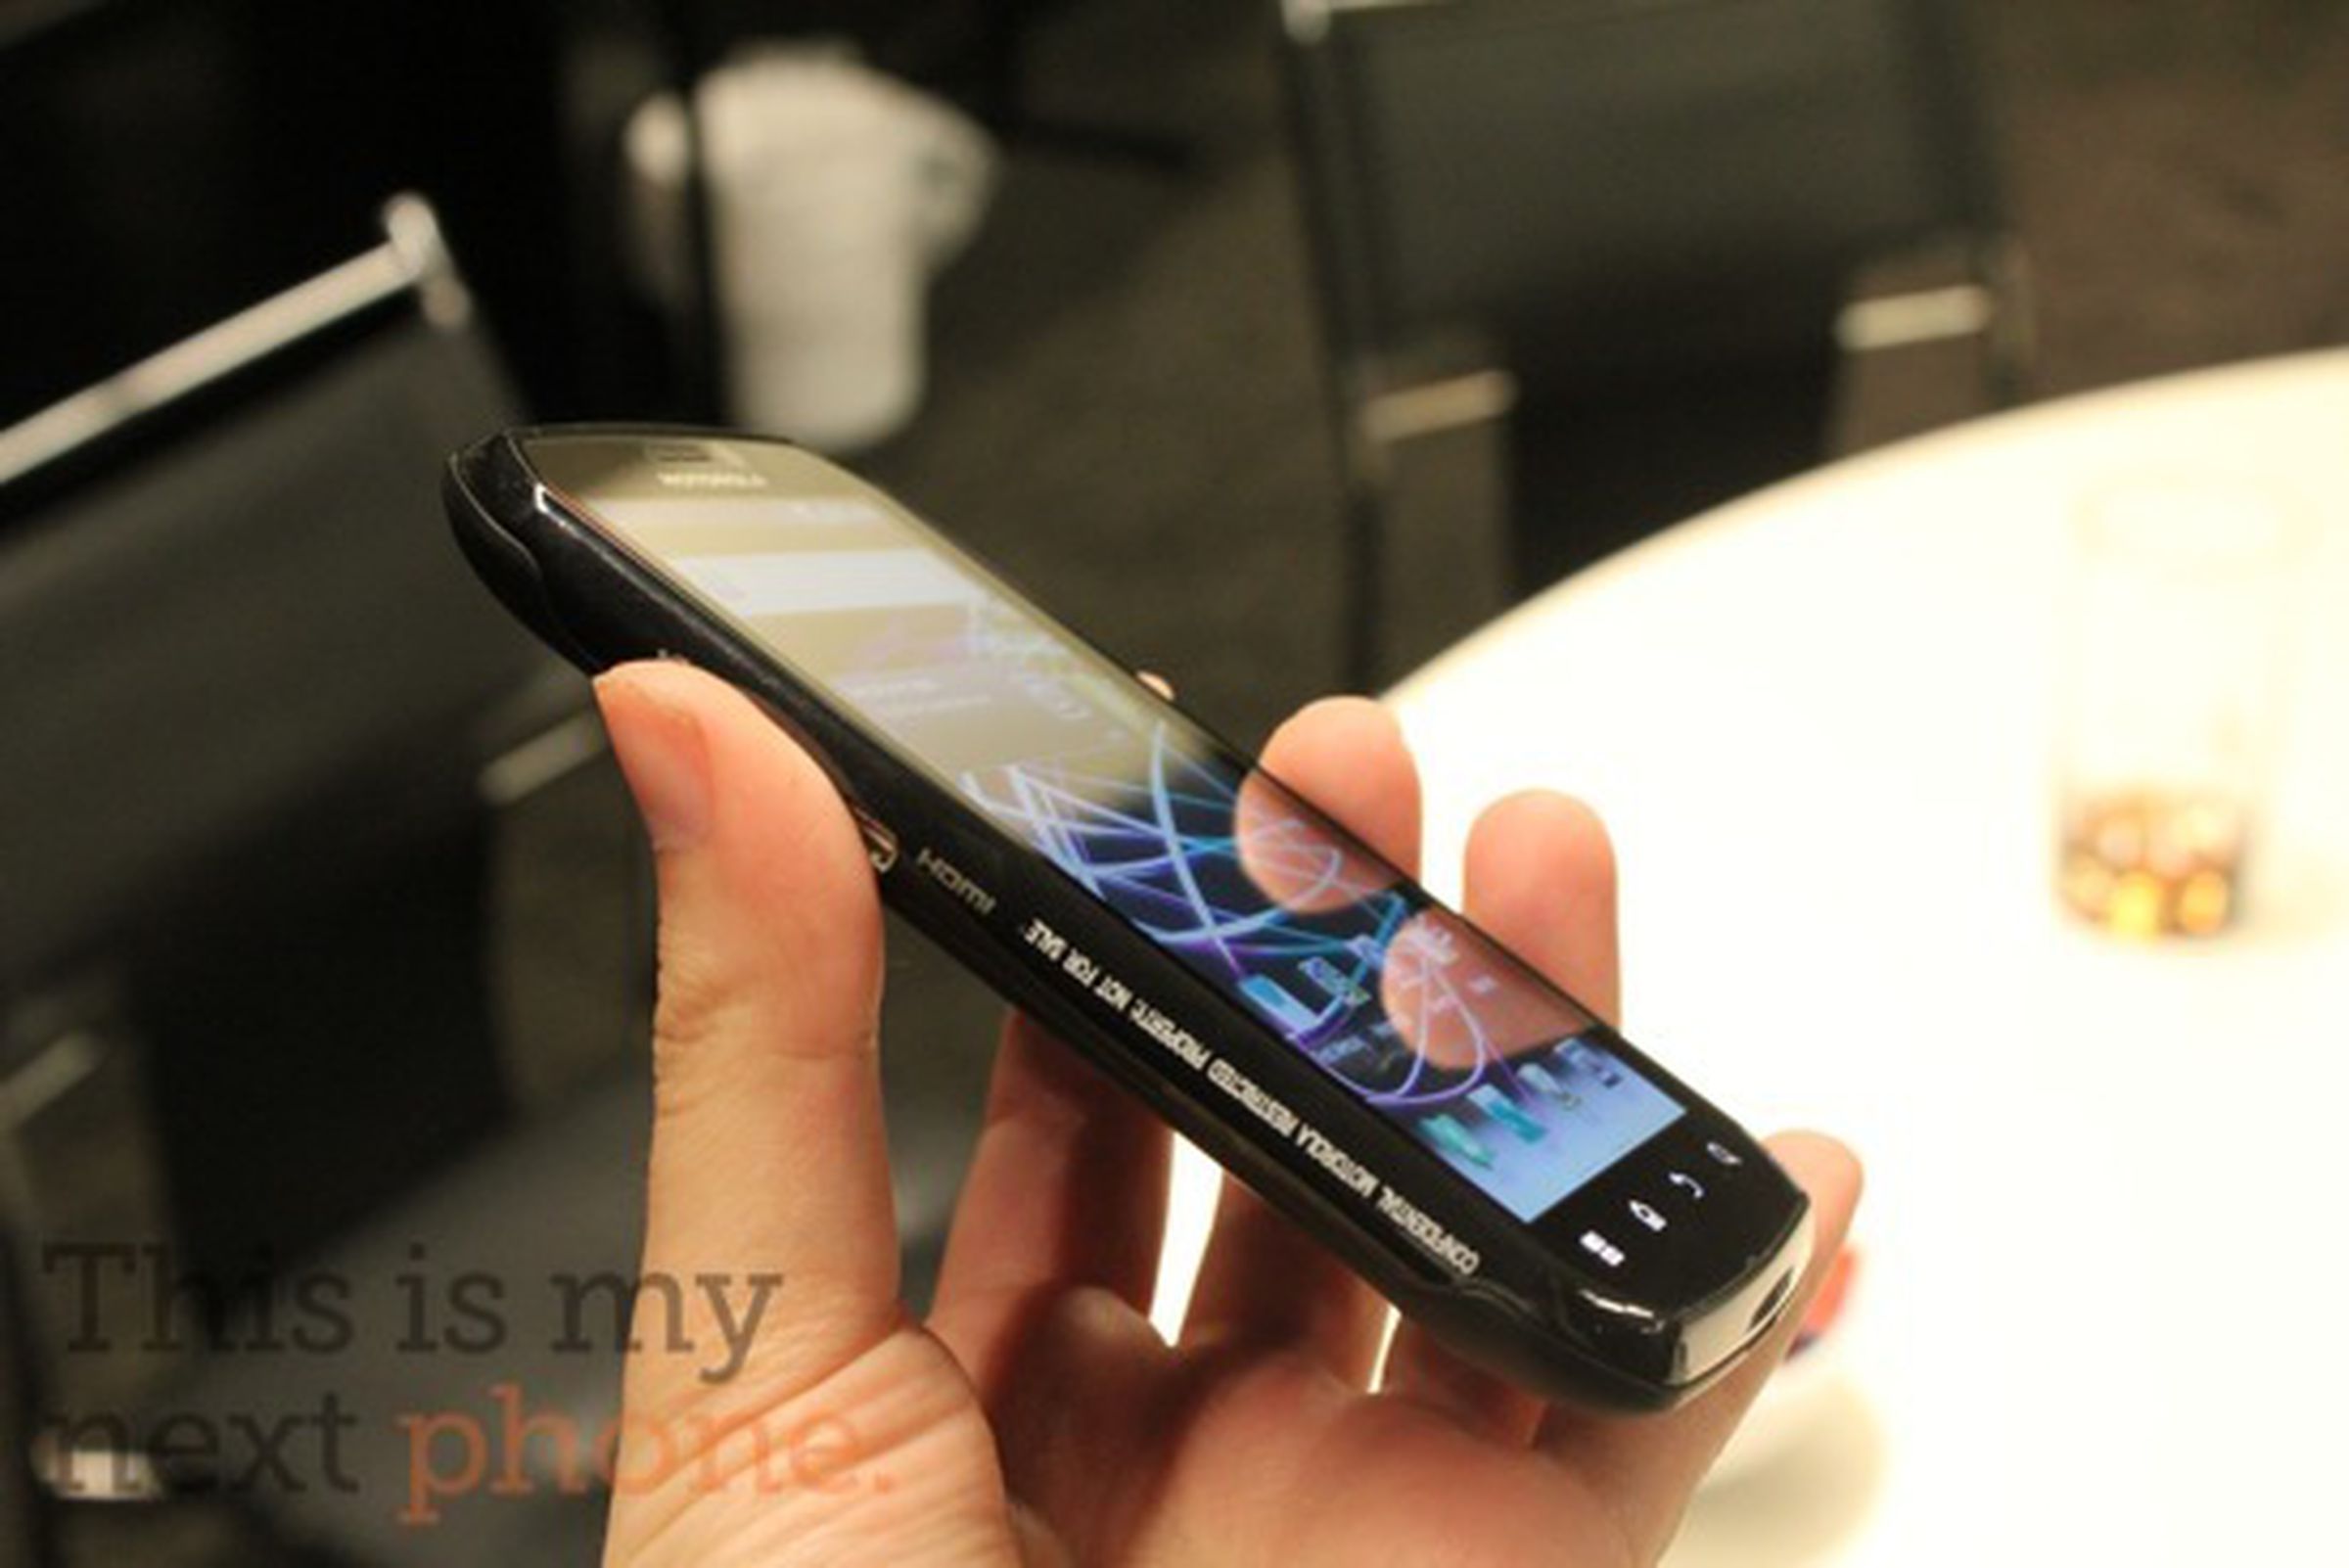 Sprint Motorola Photon 4G hands-on: 4.3-inch qHD display, Gingerbread, WiMAX, and Tegra 2